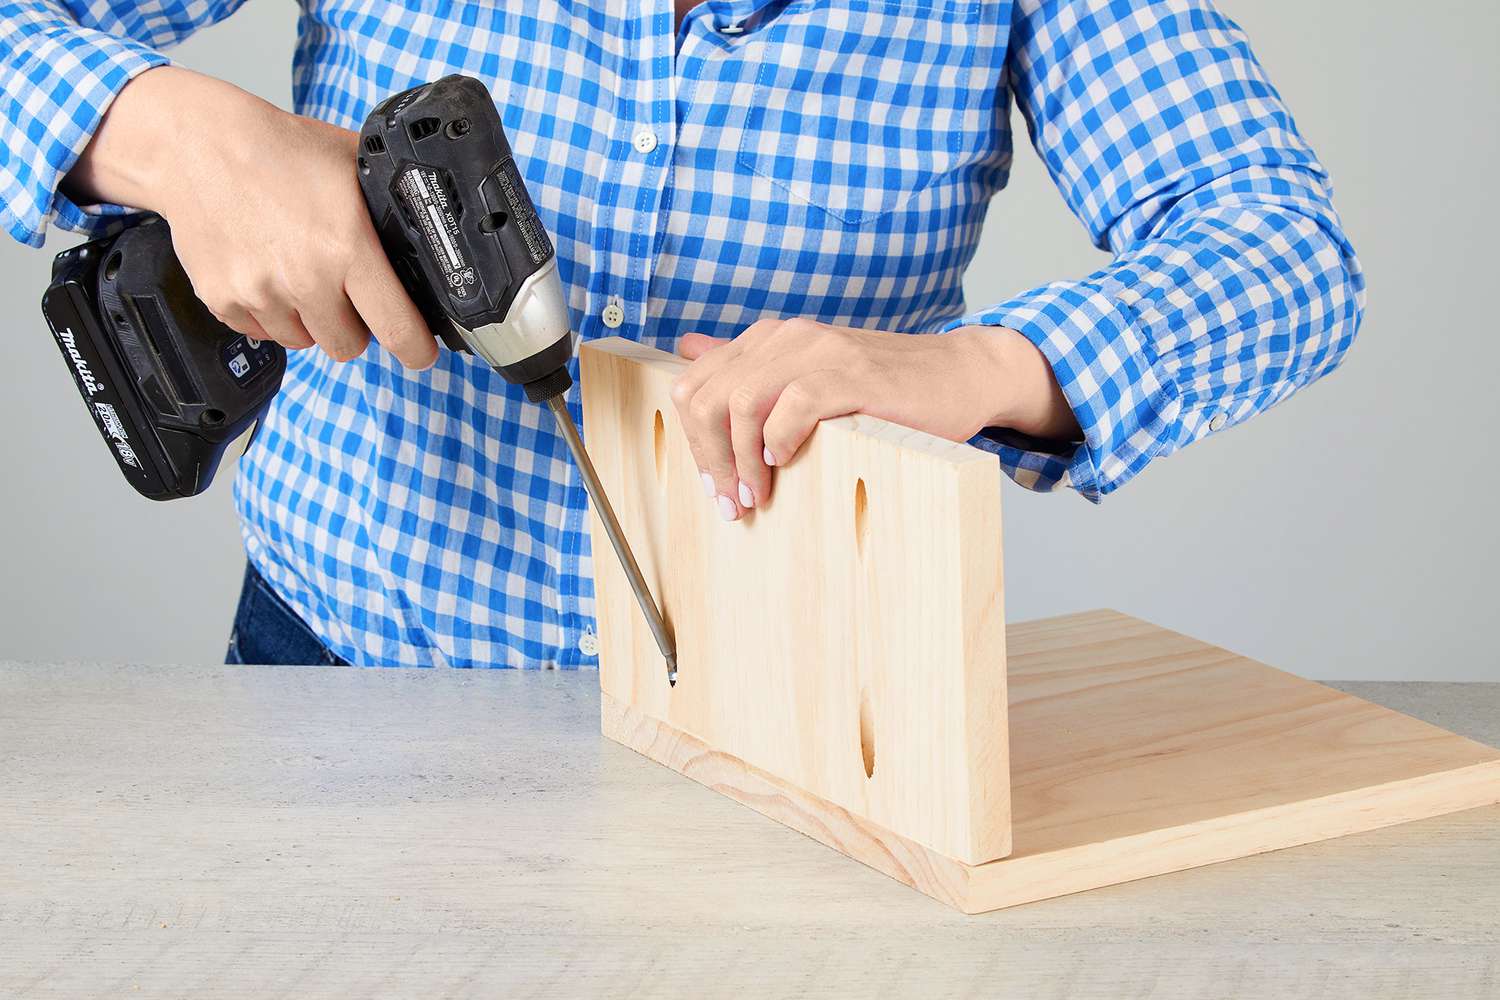 secure phone caddy to piece with pocket screws